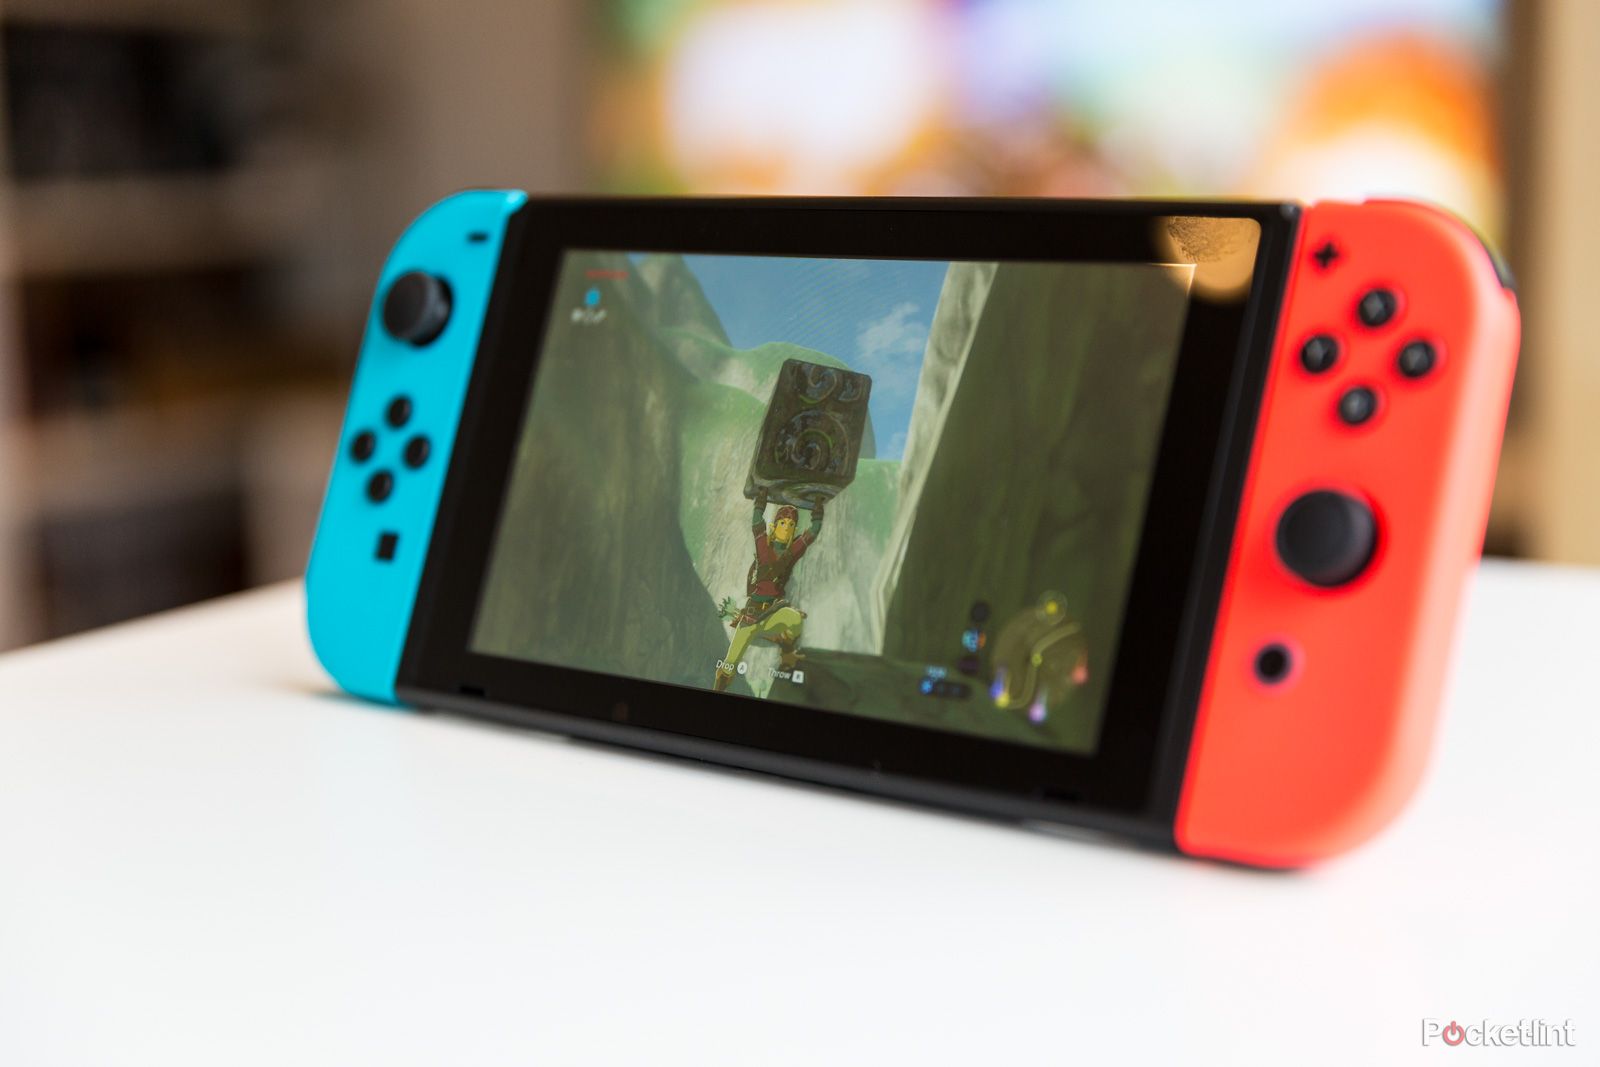 Nintendo Switch 2 coming as soon as 2019 sources say image 1